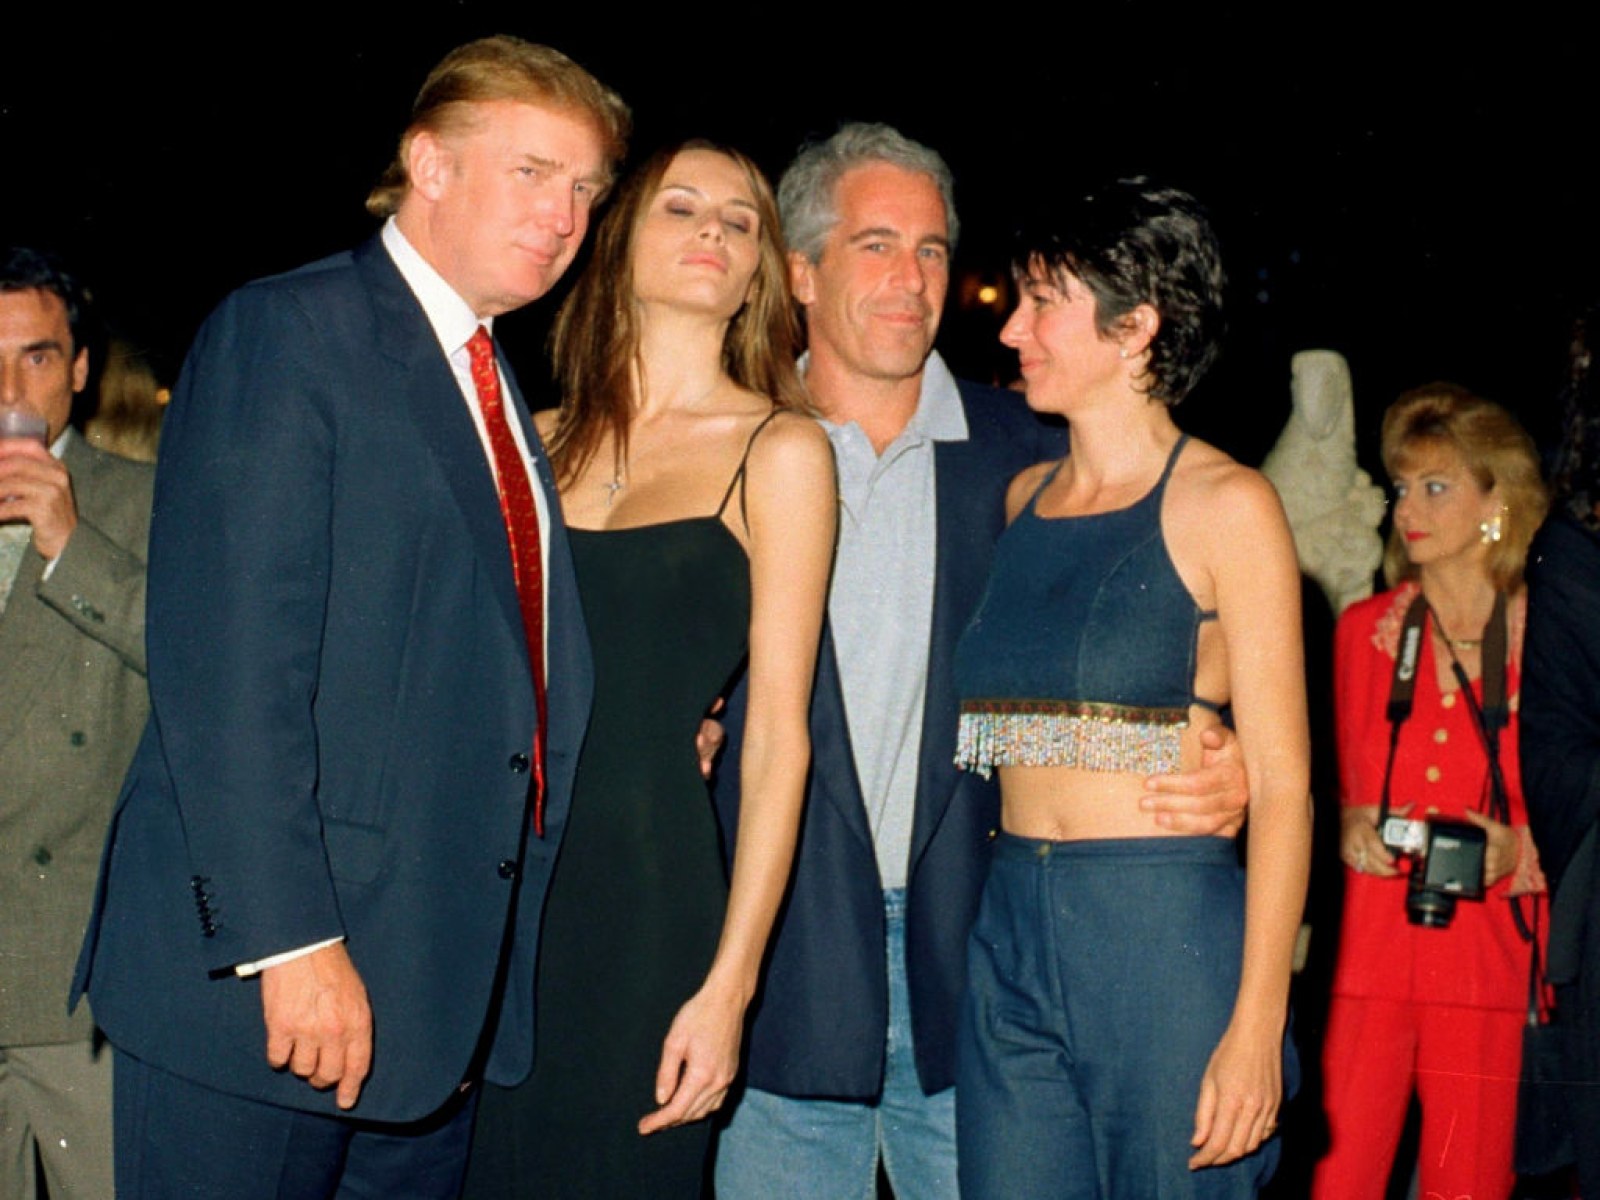 1600px x 1200px - What Is The Lolita Express? Epstein's Infamous Sex Plane ...